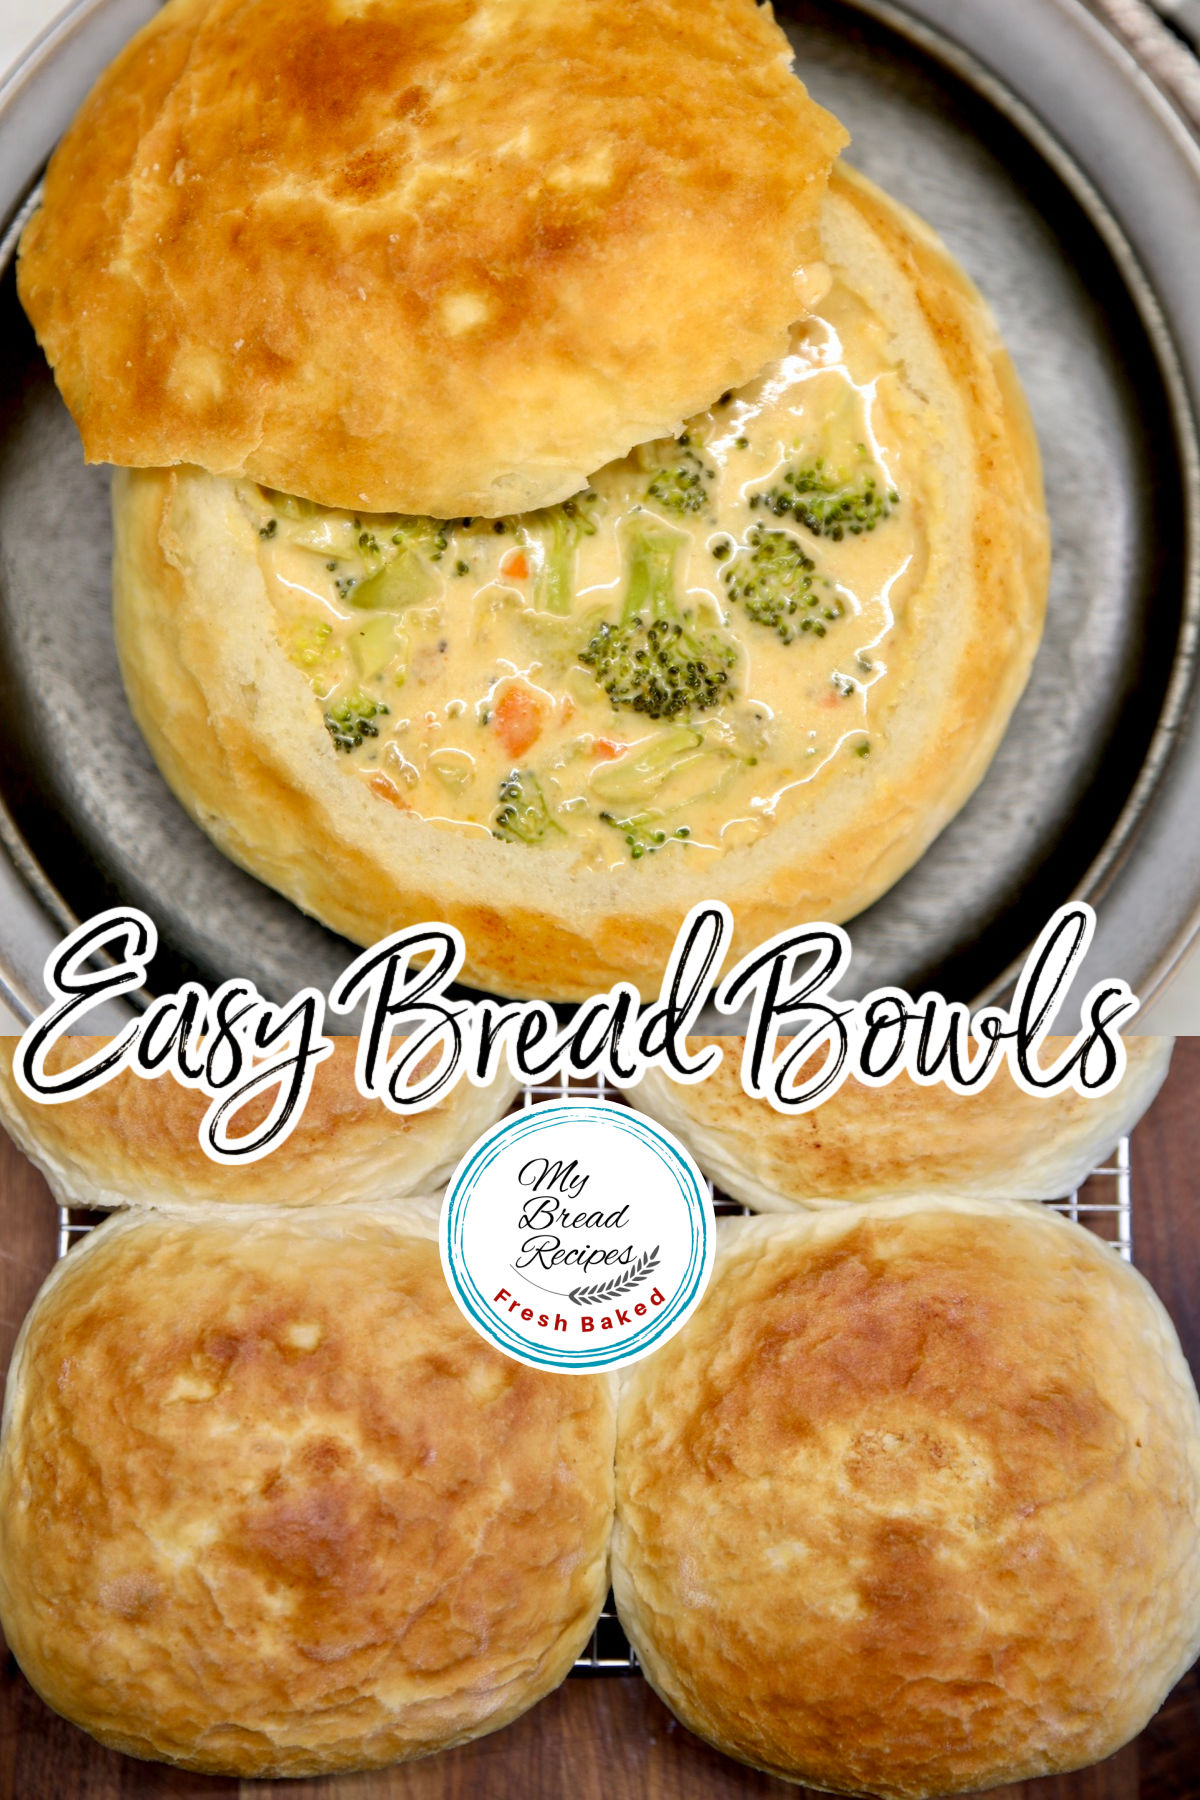 Collage: bread bowl with broccoli cheese soup/ bread bowls on a wire rack - text overlay.